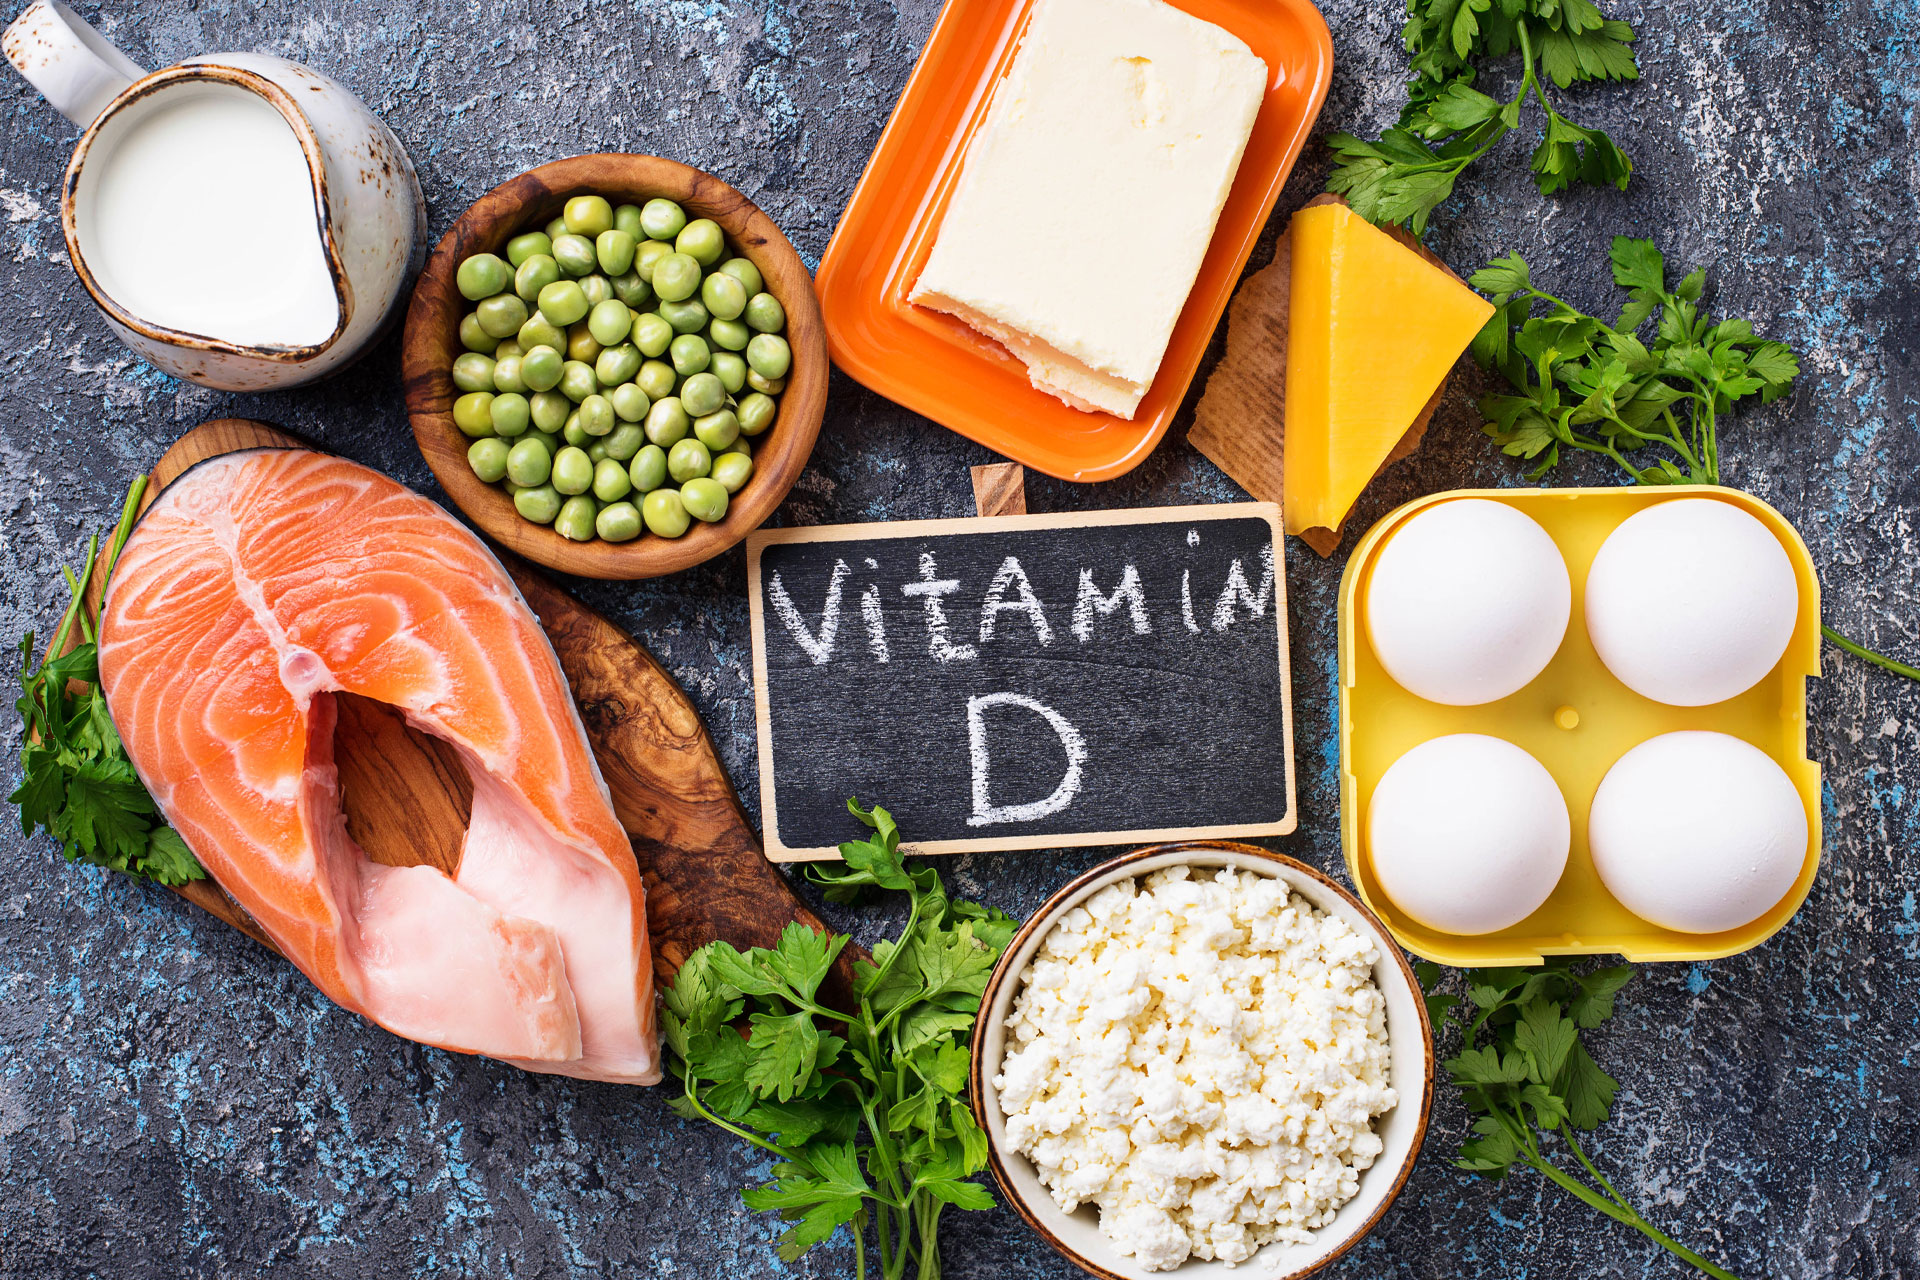 Foods That Contain Vitamin D